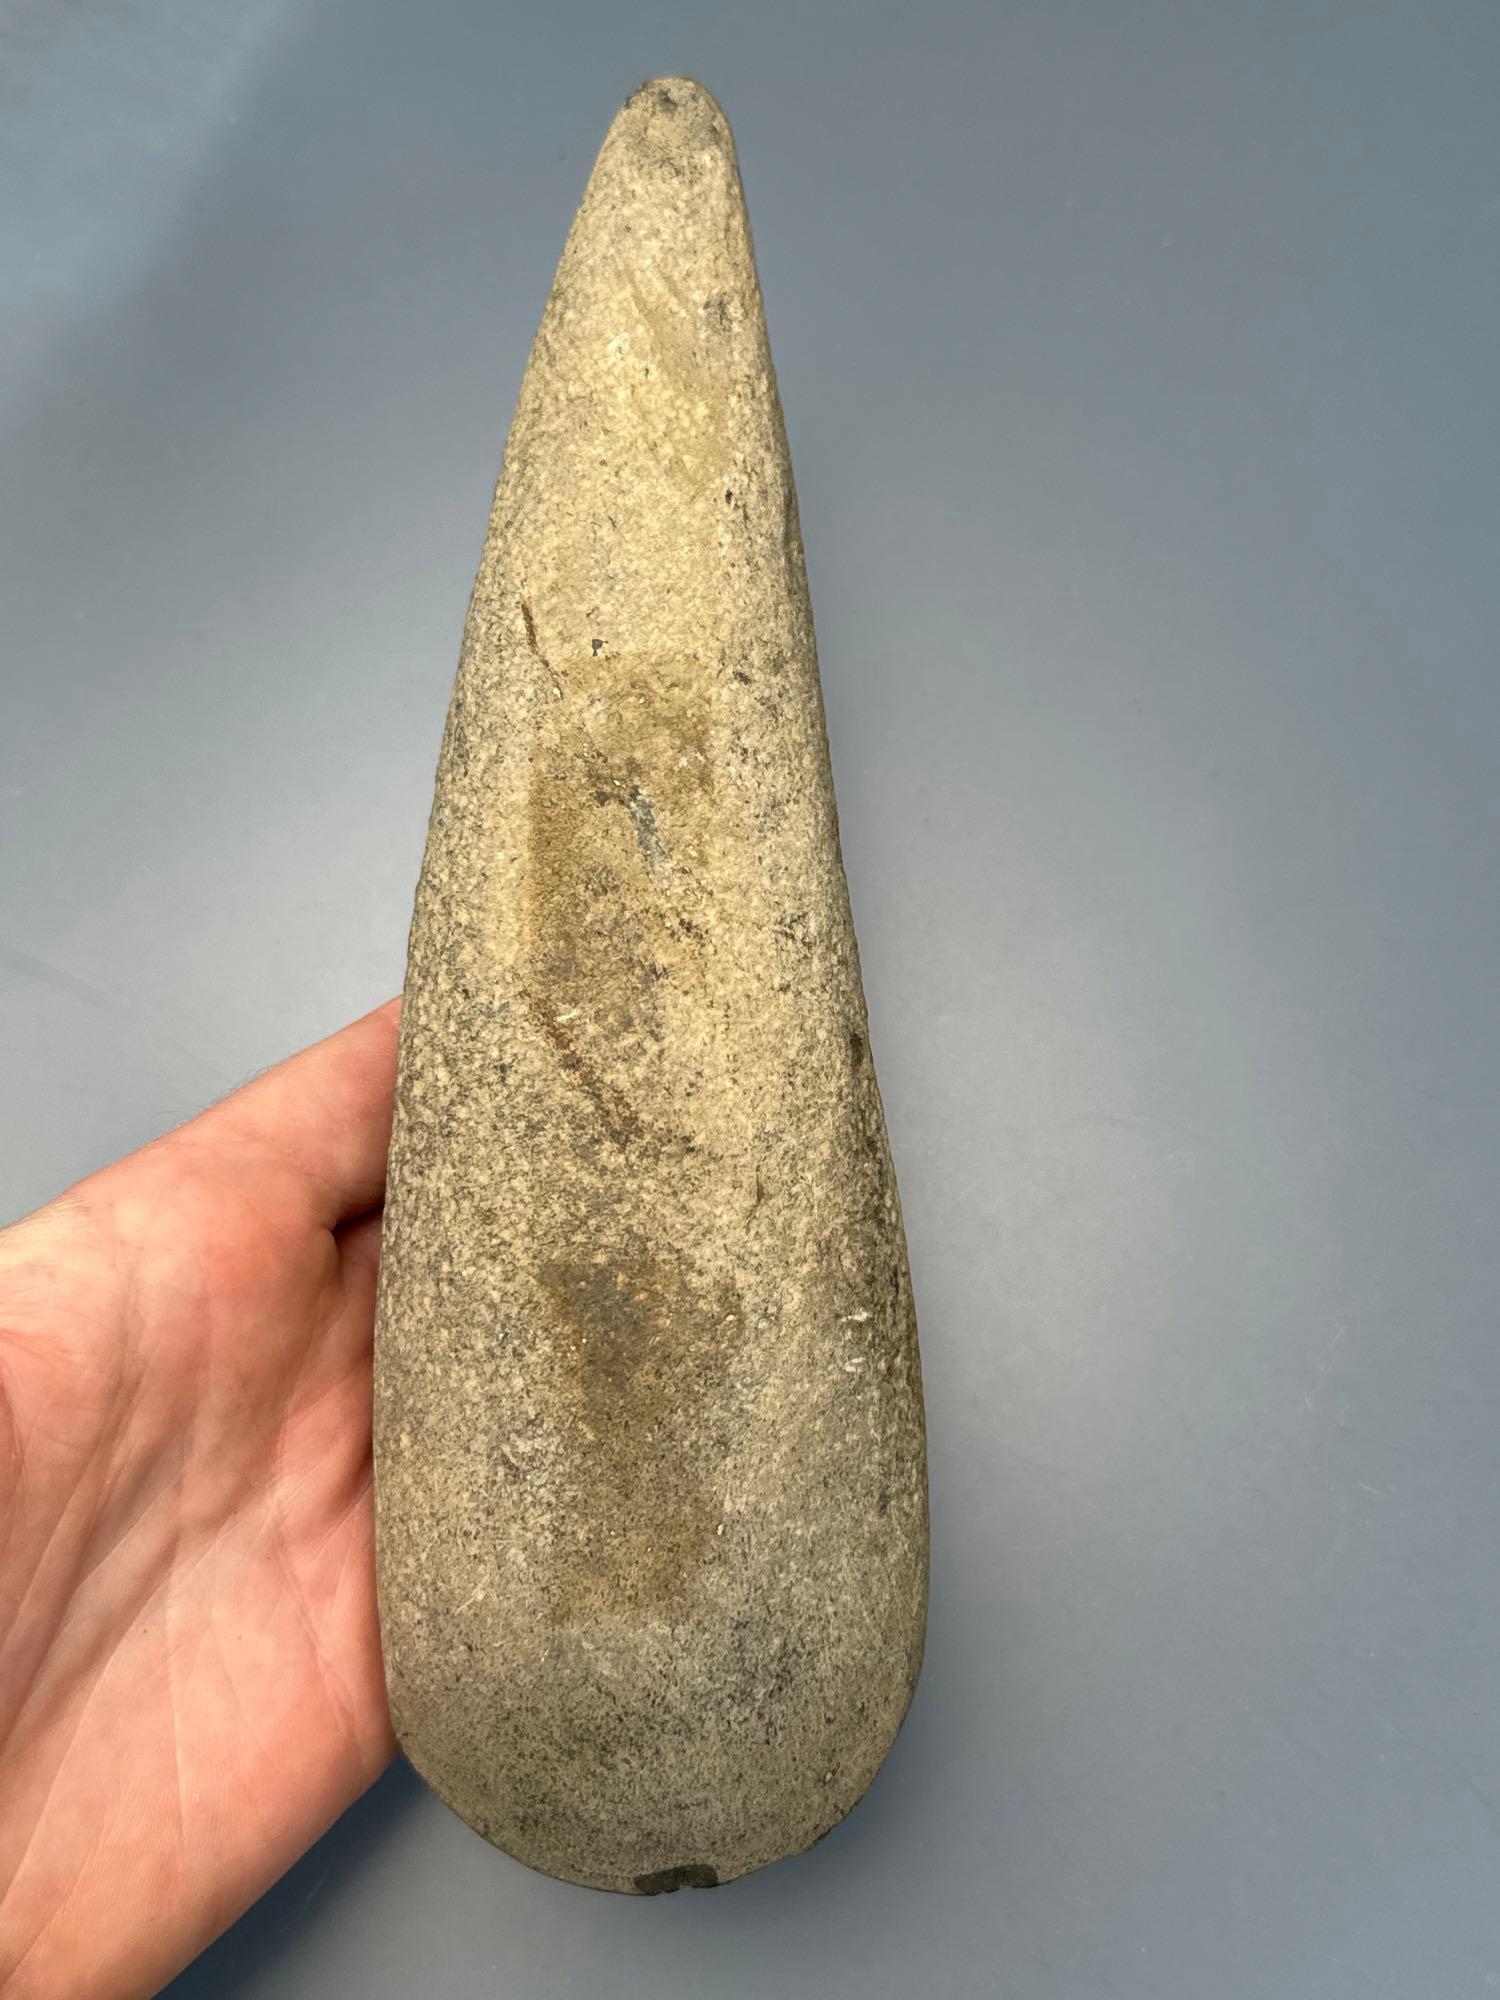 Well-Made 8" Poll Celt, Found in Lancaster Co., PA, Ex: Sonny Delong Collection of York County, PA.